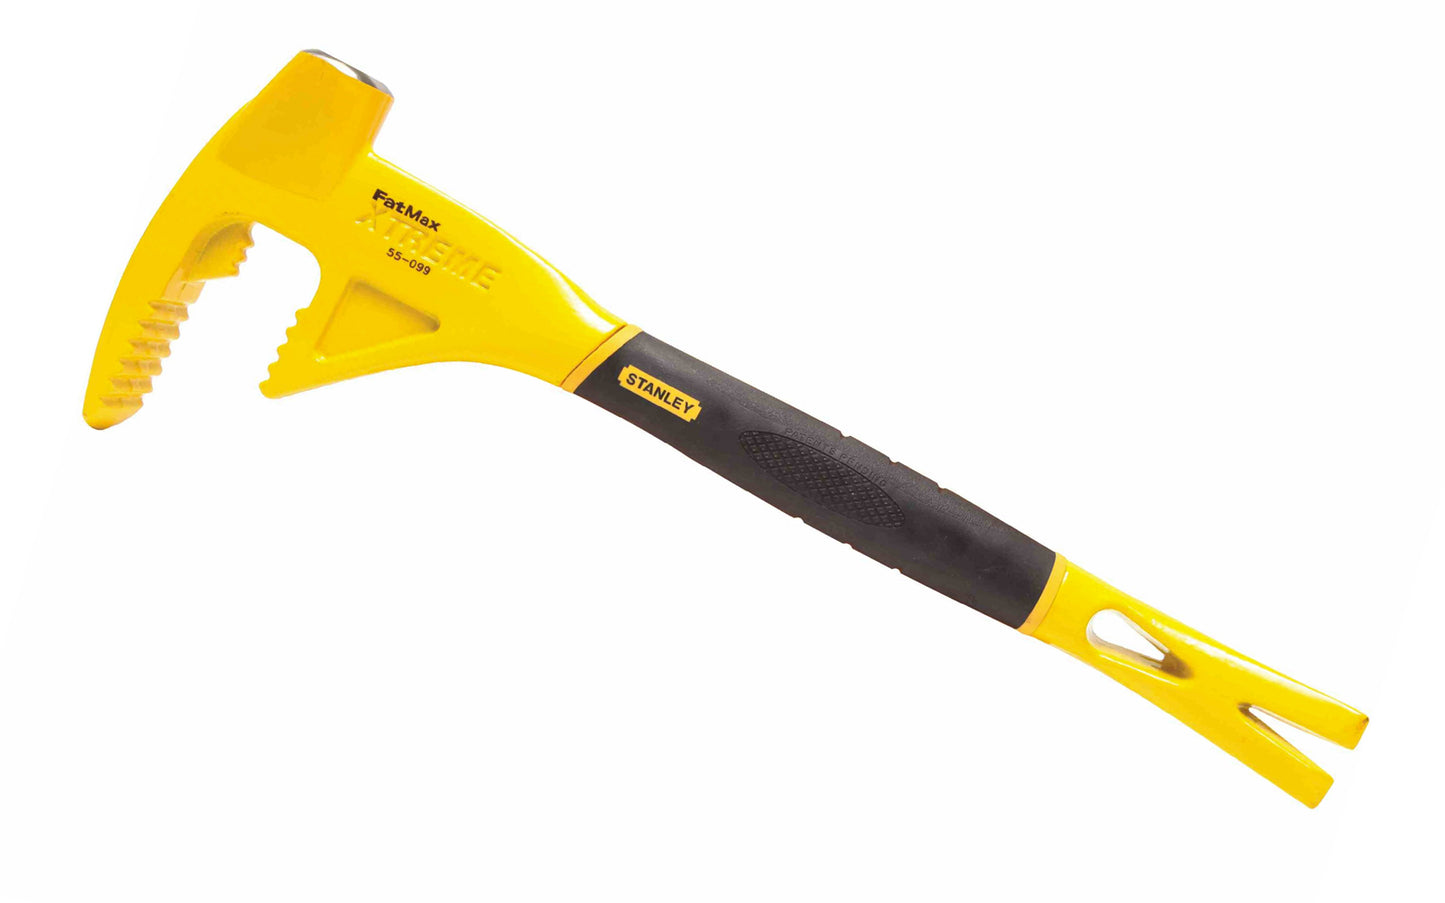 Stanley FatMax 18" Functional Utility Bar ~ 55-099 ~ 4-in-1 tool for prying, splitting, board bending & striking jobs - One Piece all-forged steel pry bar is designed for heavy demolition work